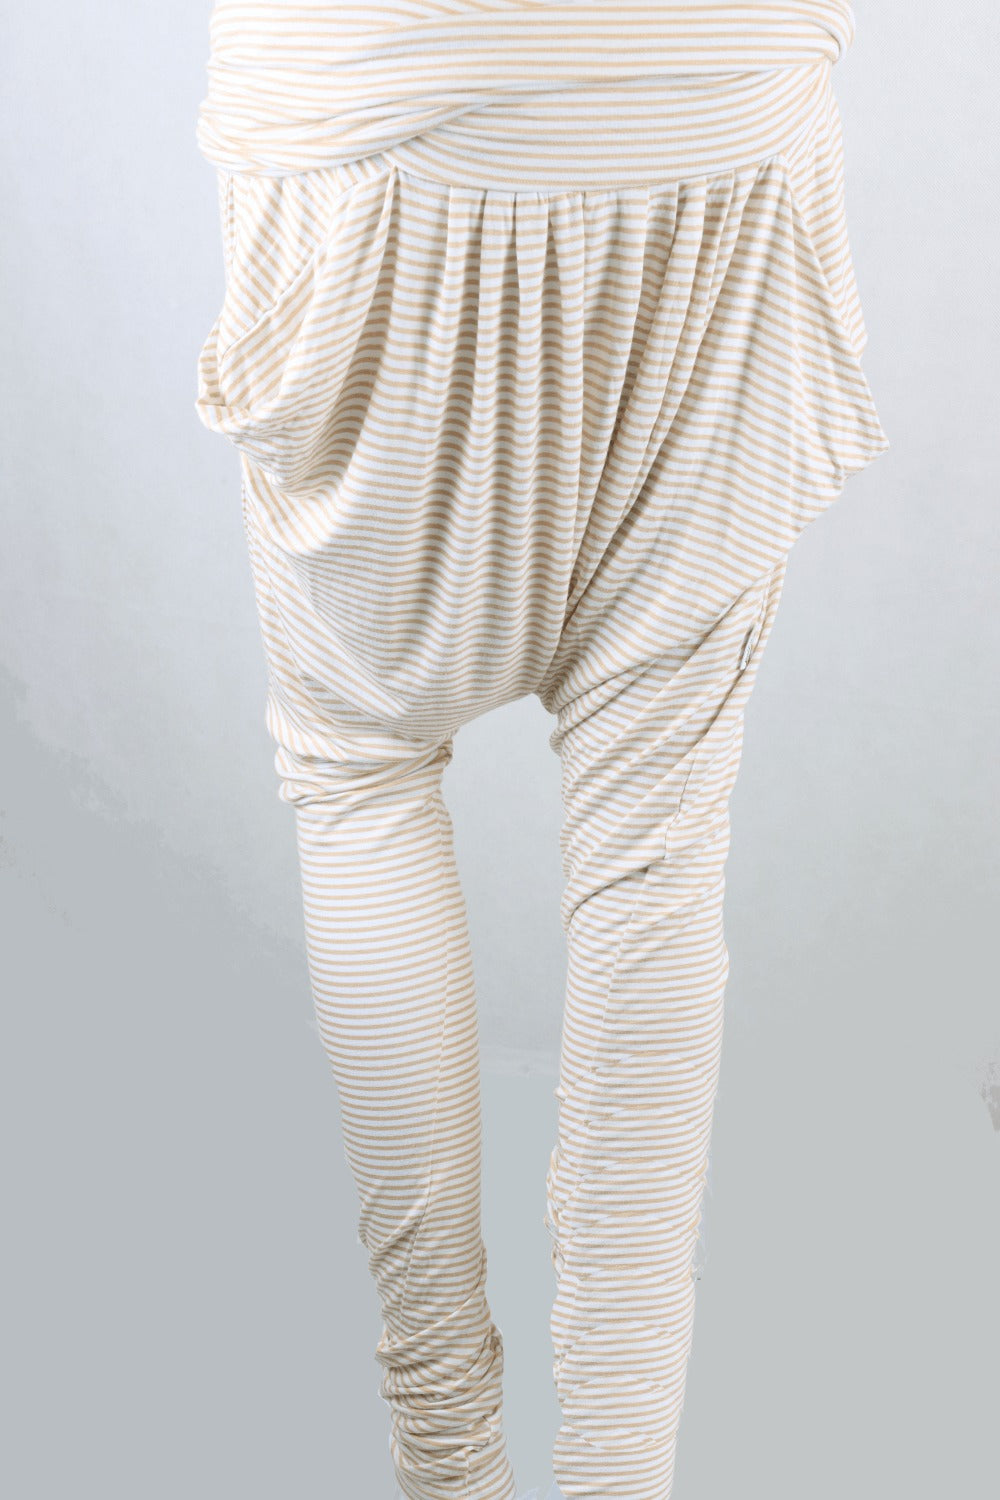 From Zion Relaxed Pants Brown And White Striped Pants M